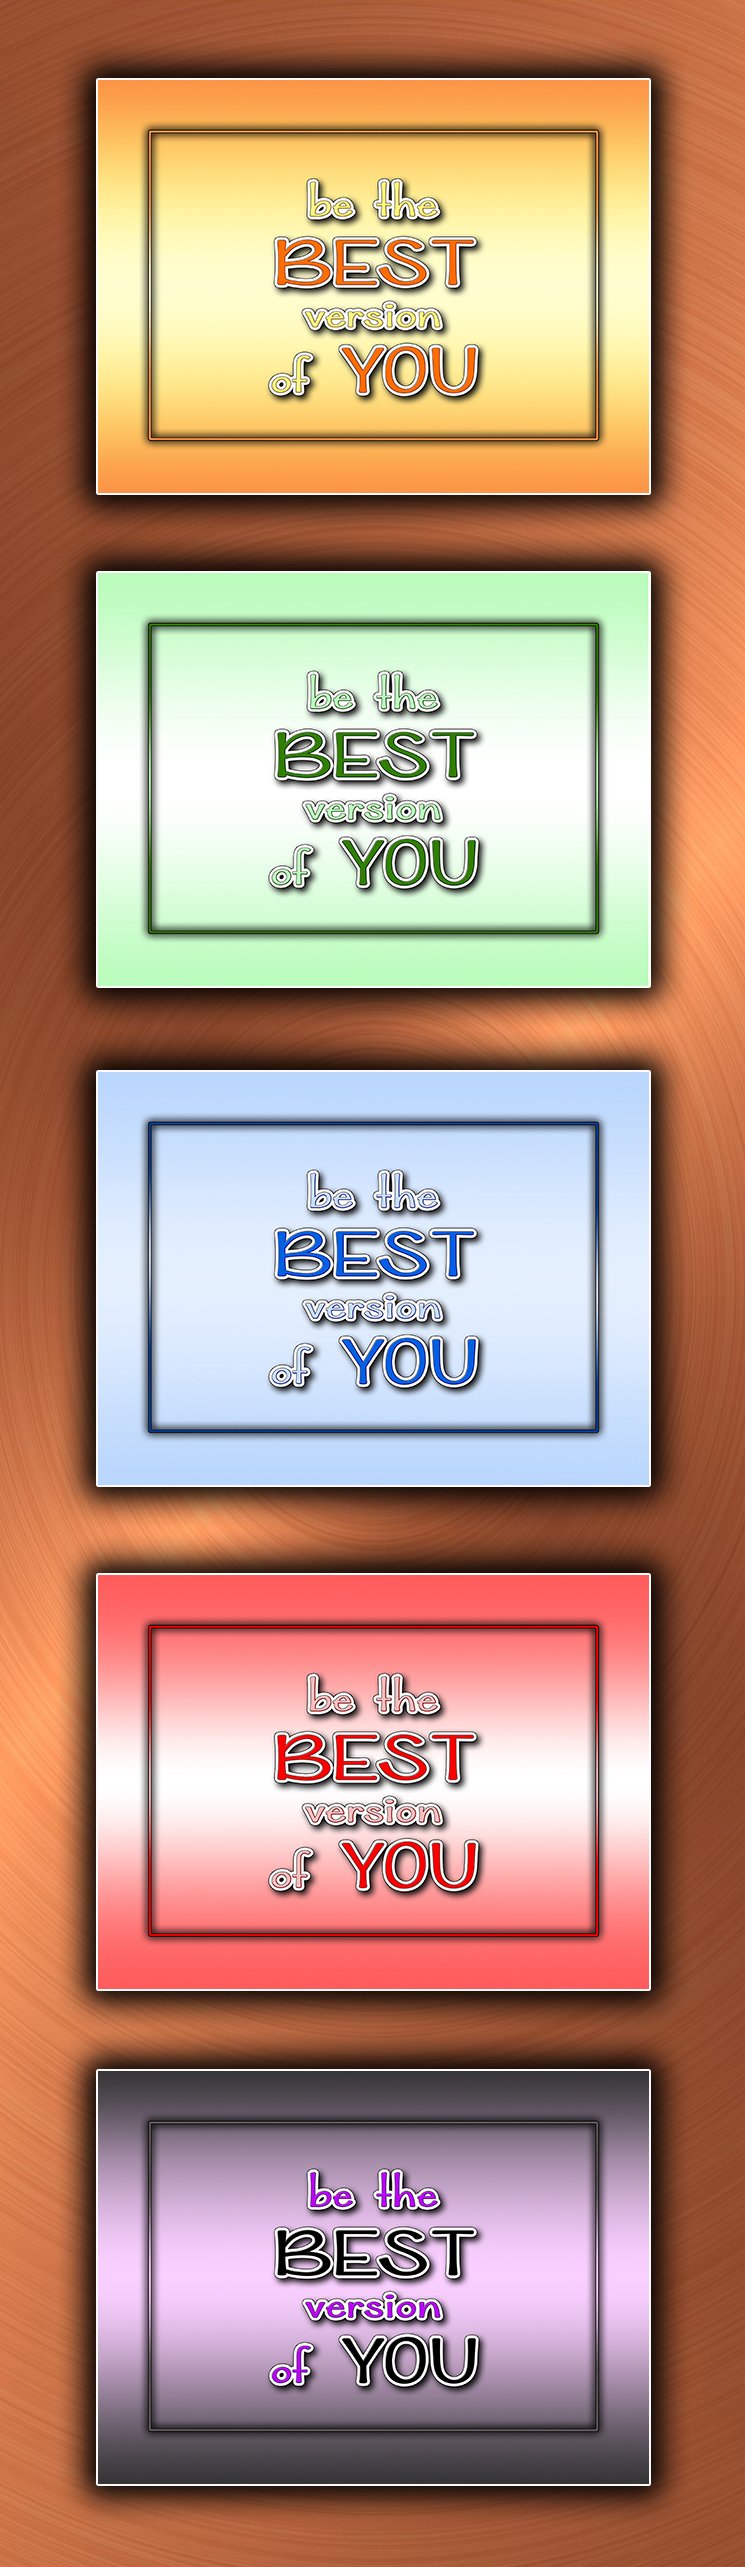 Quote - Be the Best version of you